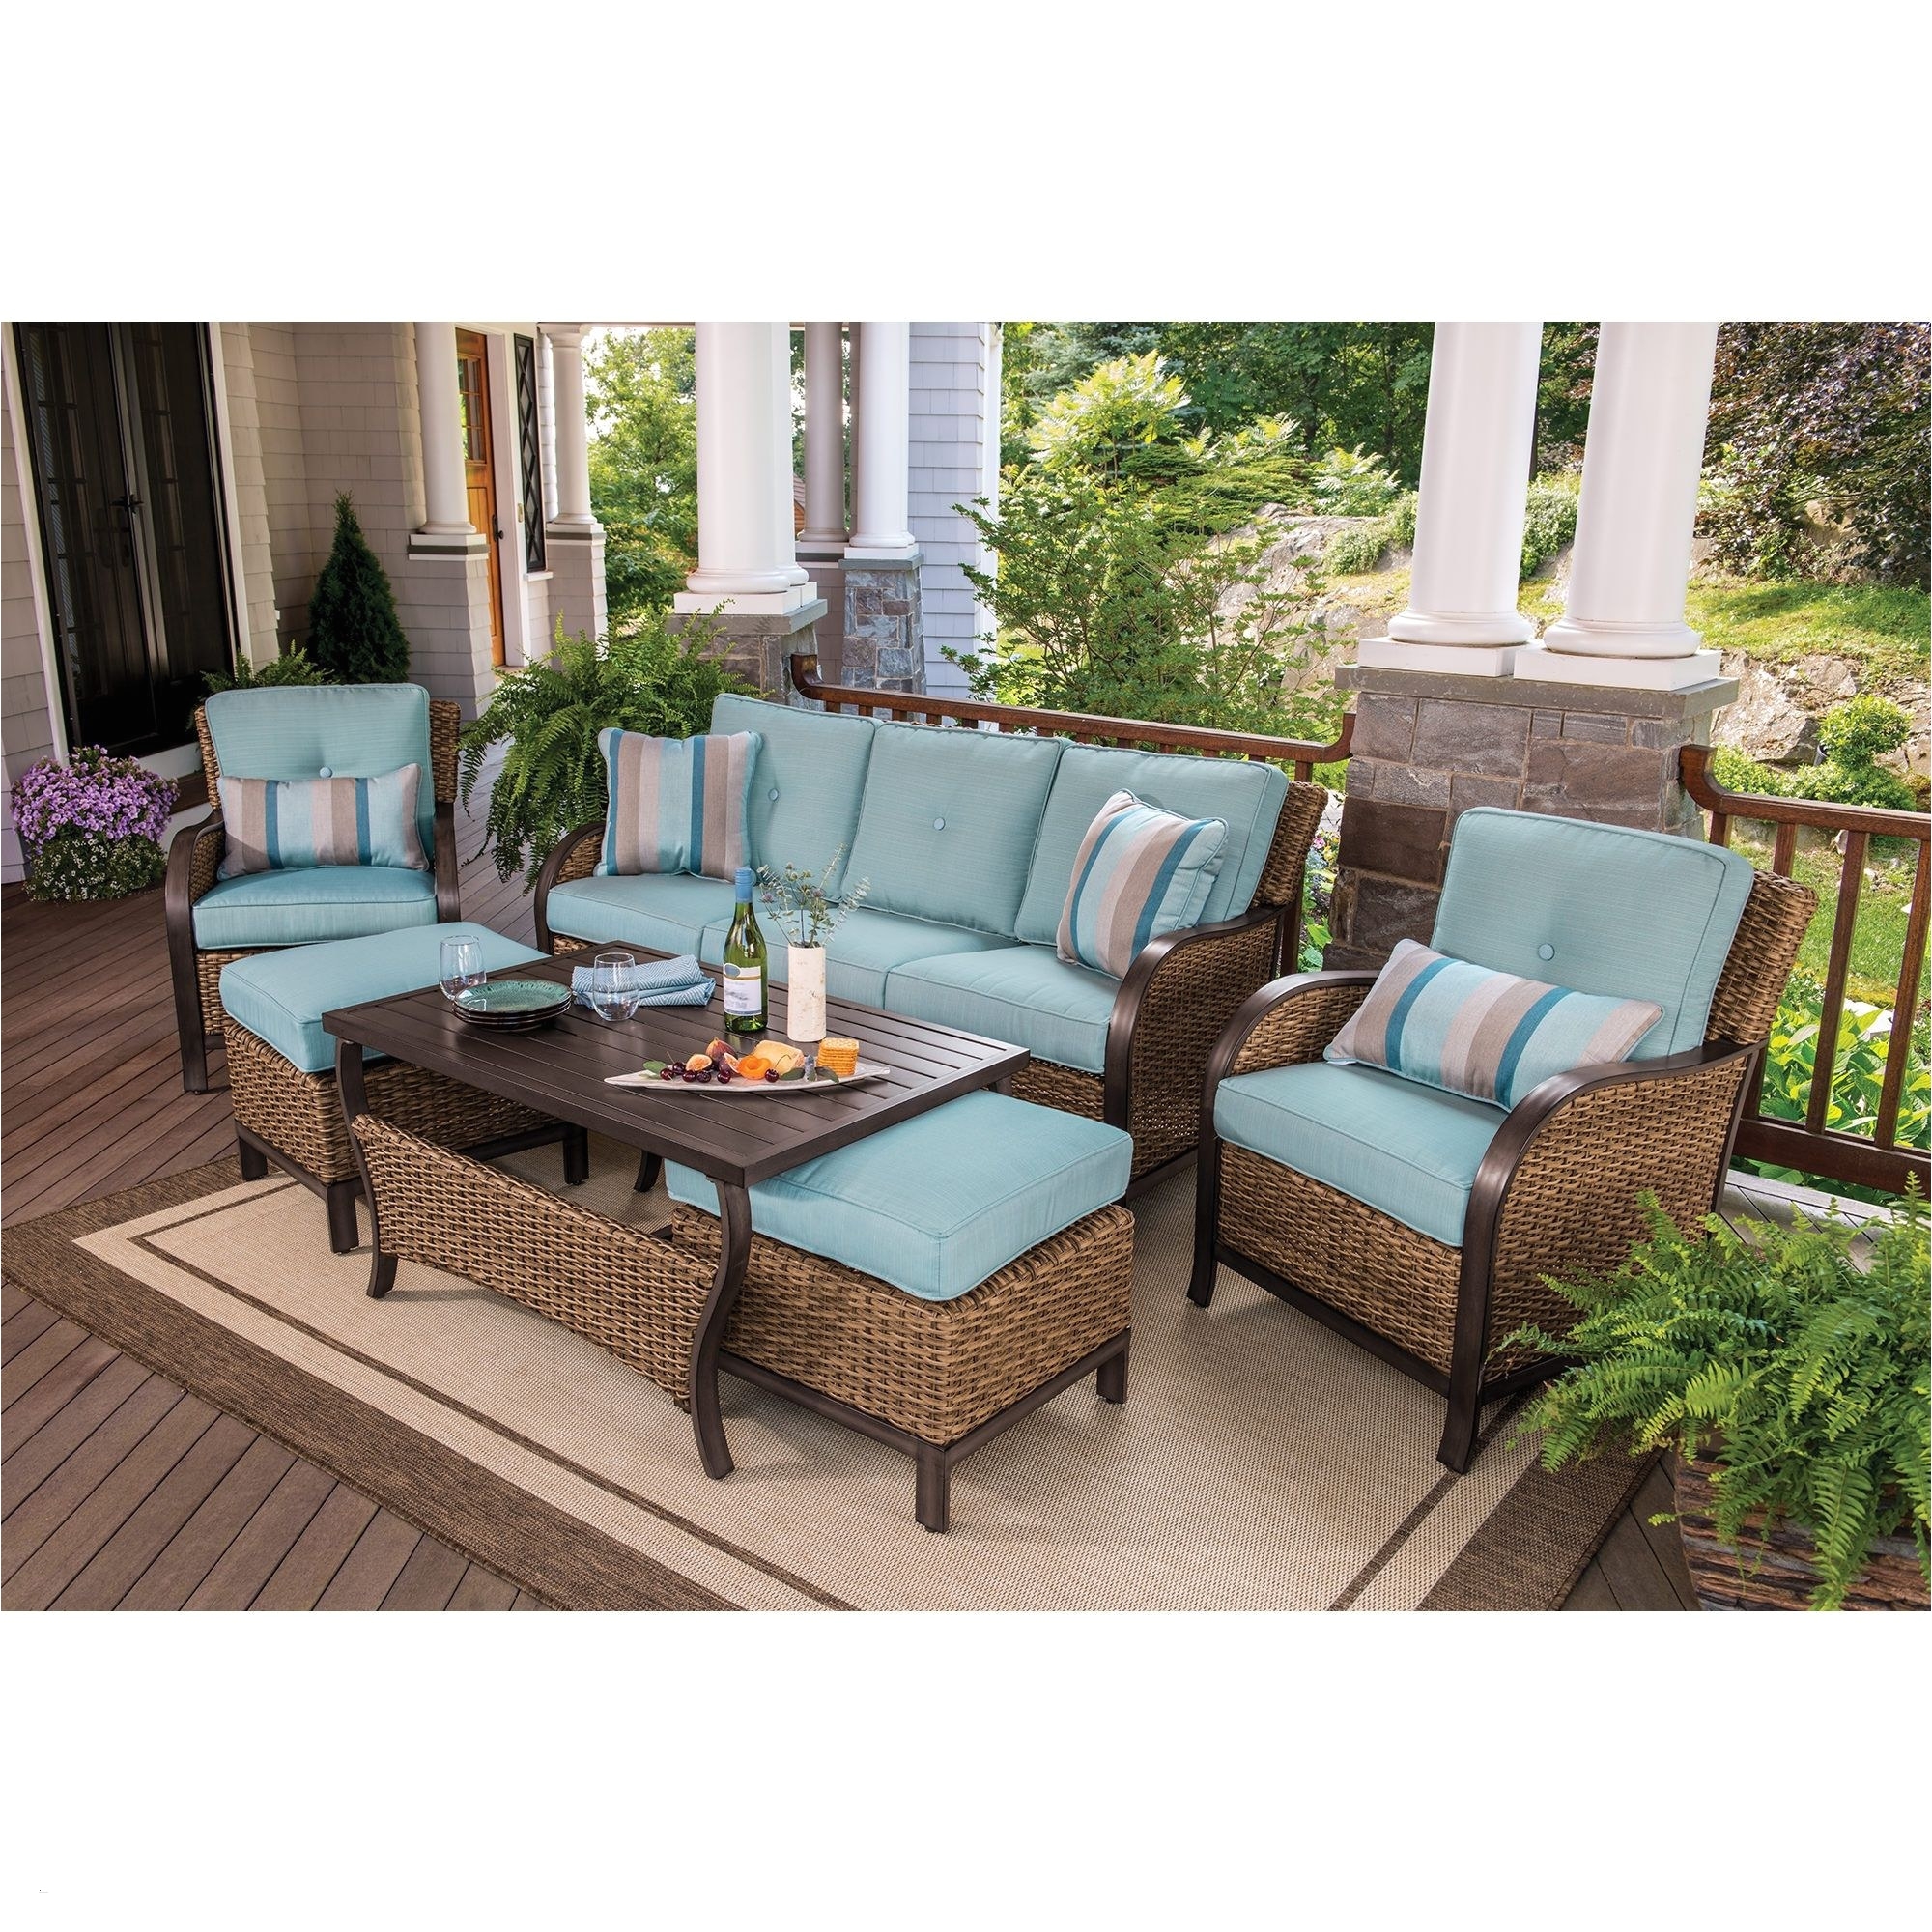 bjs outdoor furniture fresh 41 cool bjs outdoor furniture you ll want to steal this summer